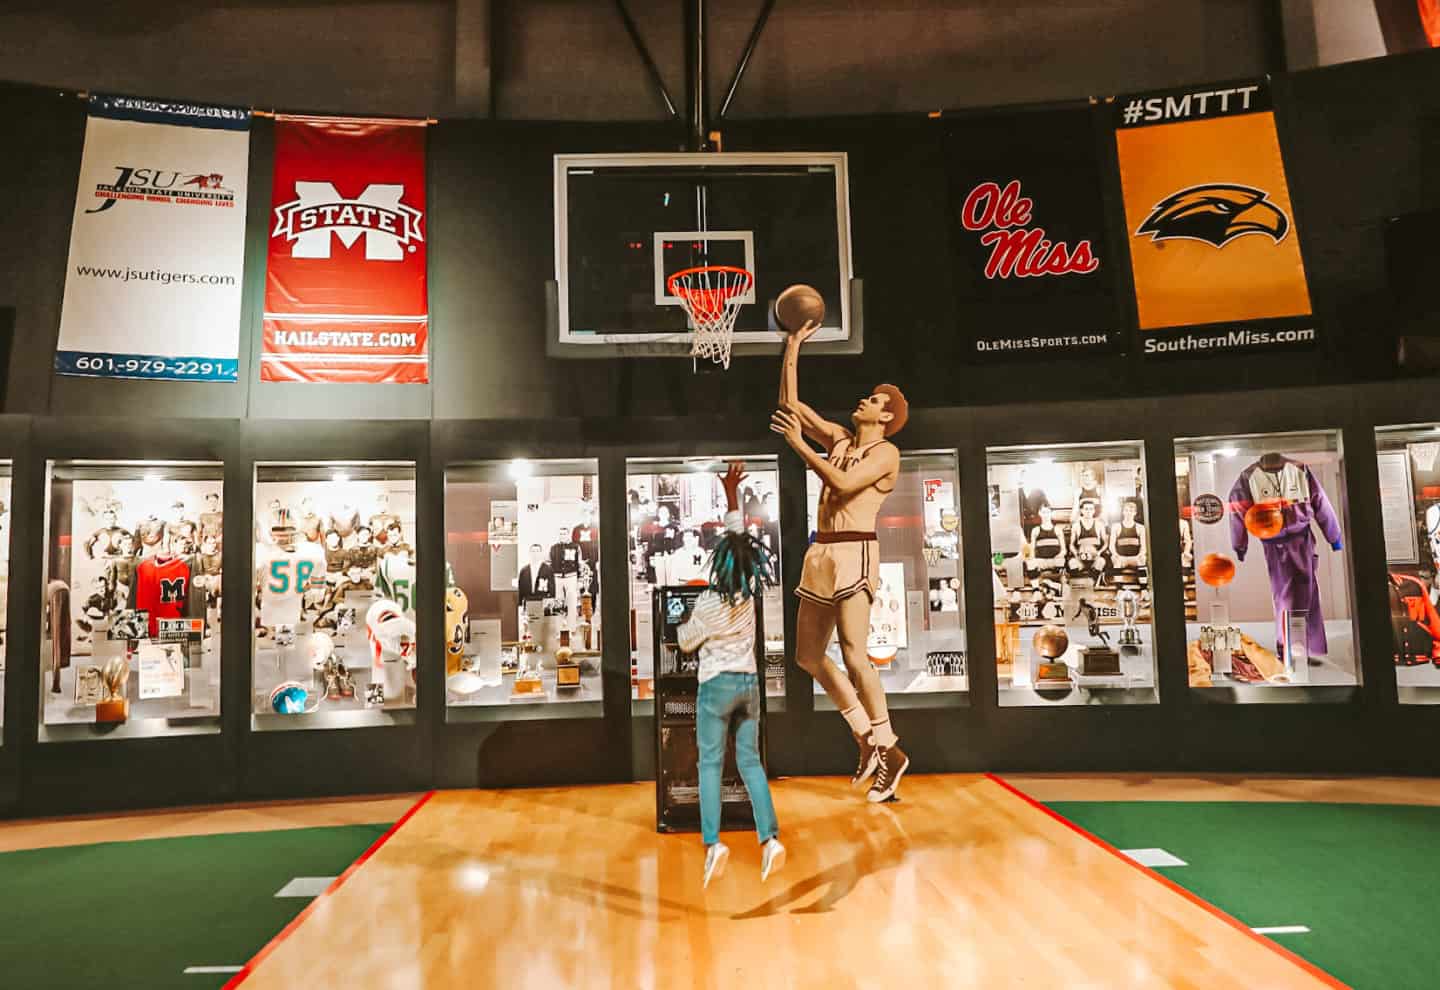 Sports Hall of Fame | Fun Things To Do In Jackson Mississippi with Kids